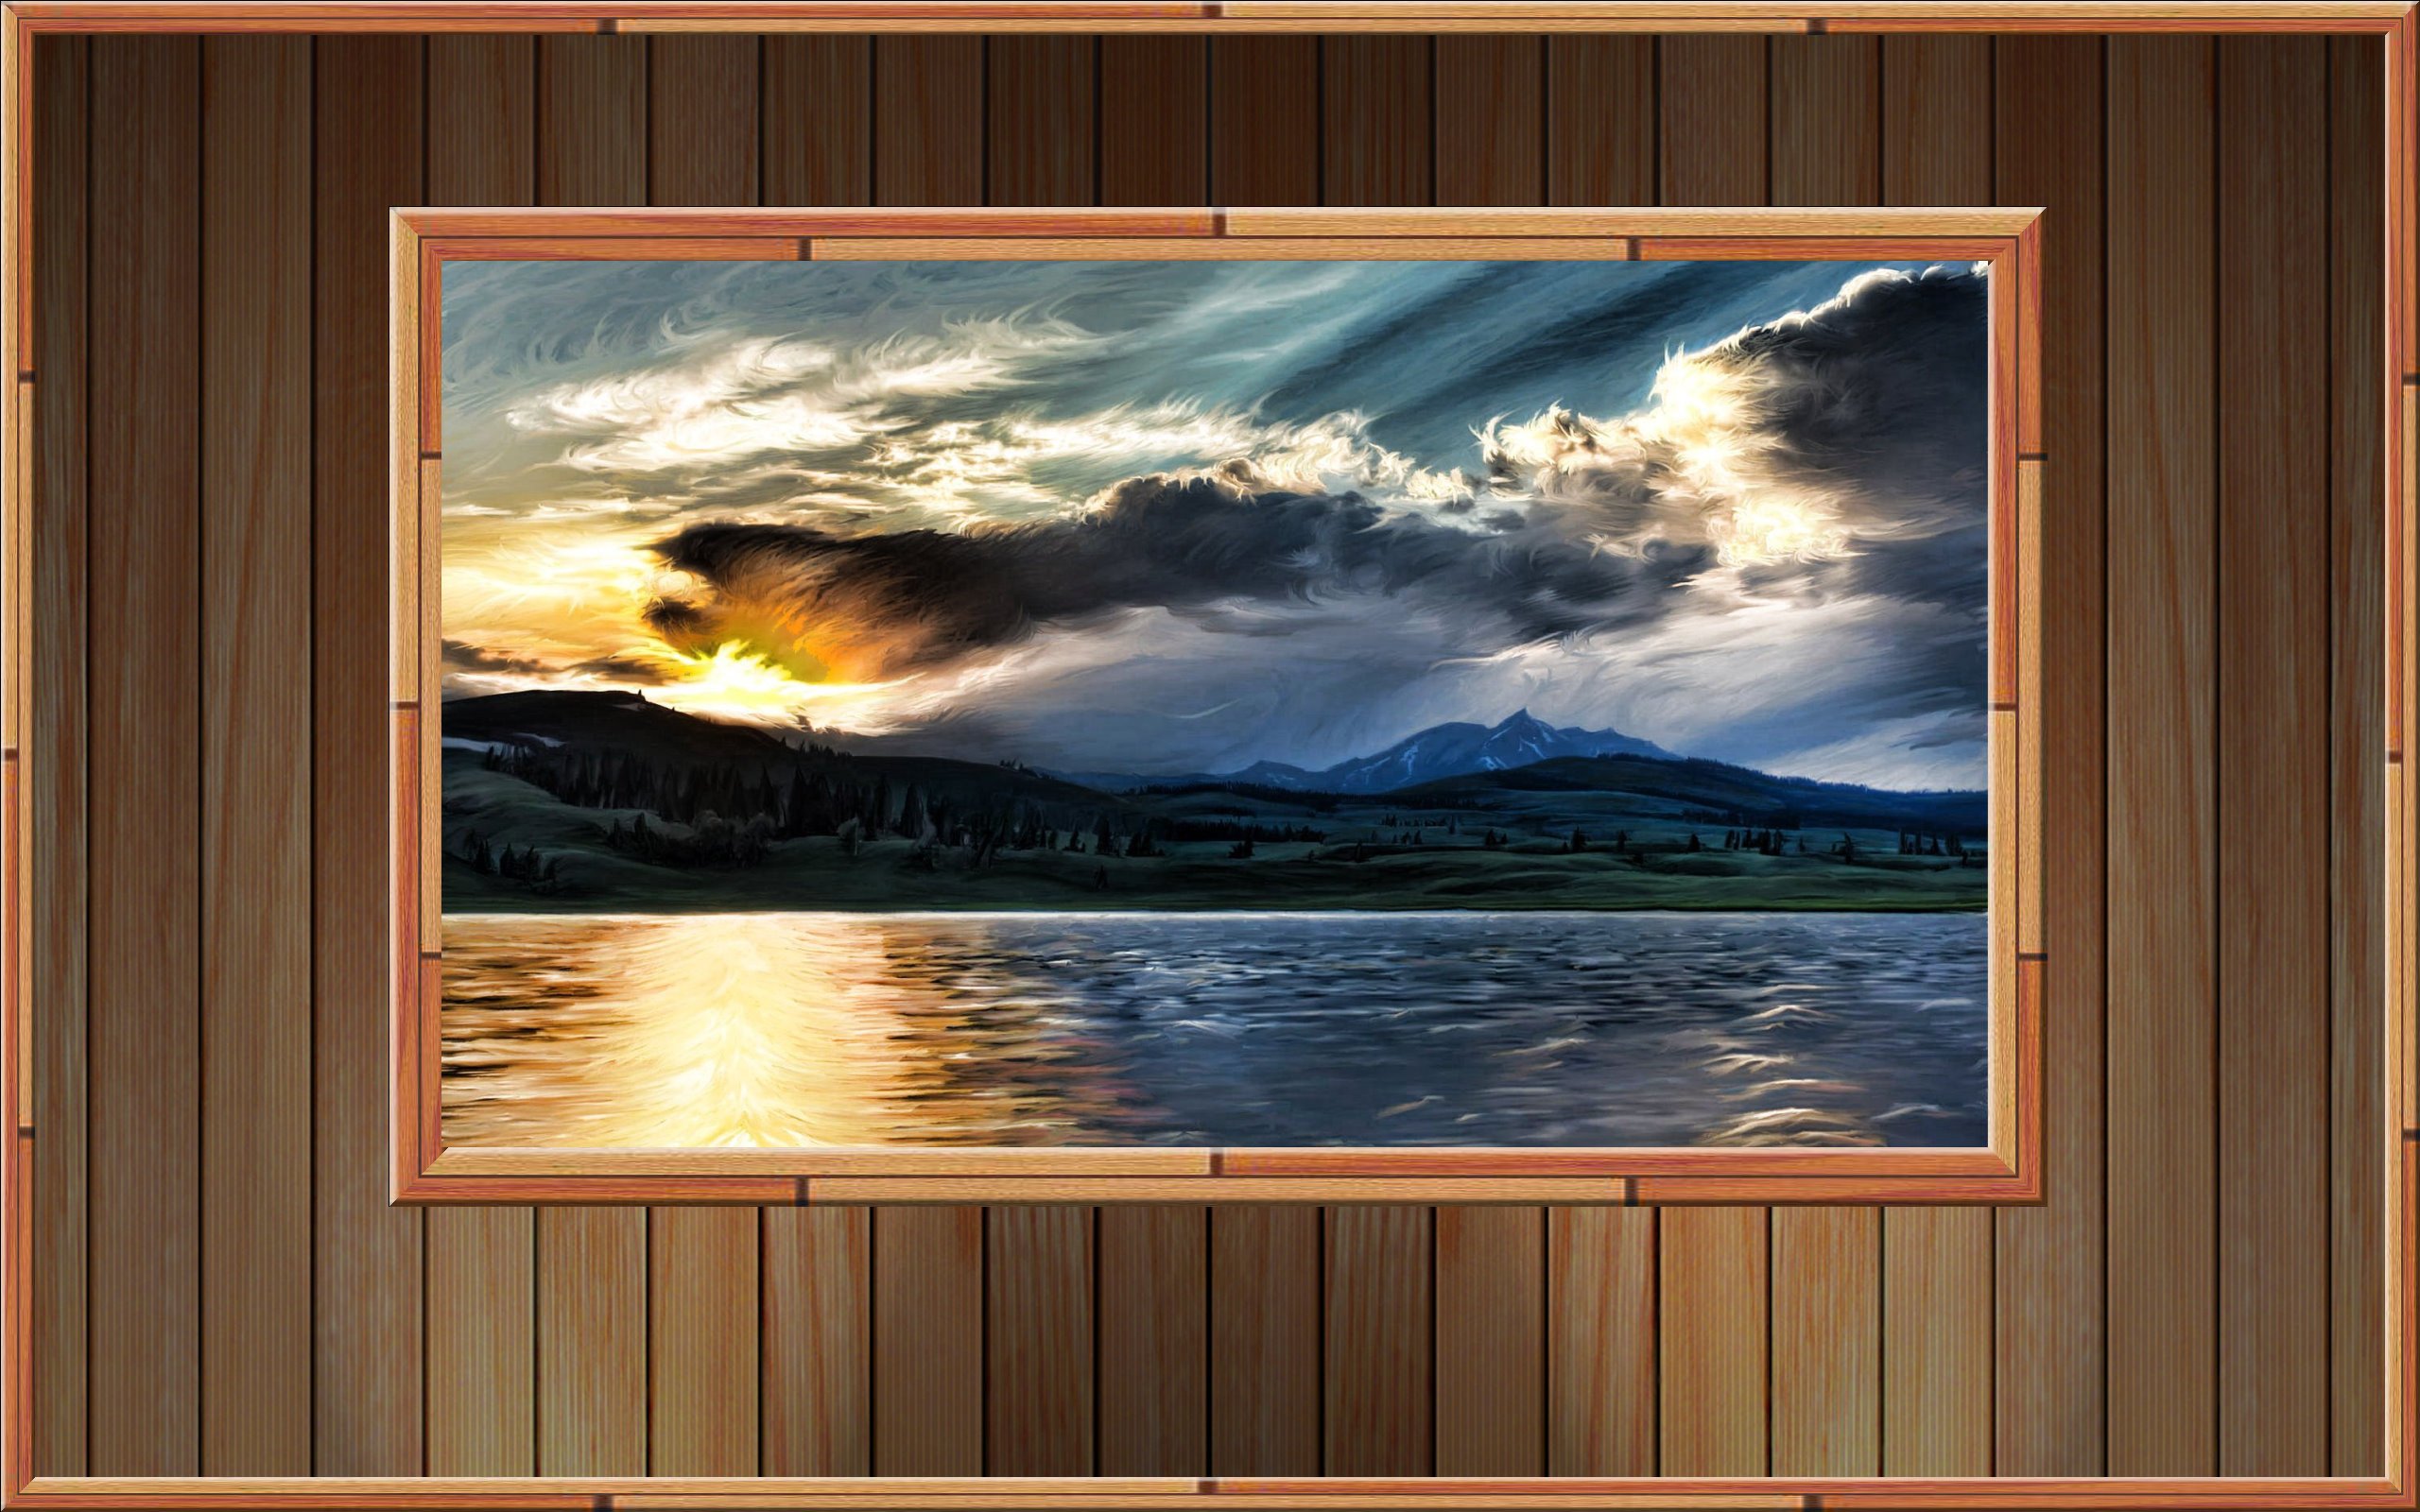 wall, Planks, Wooden surface, Painting, Sea, Mountains, Sunset, Landscape Wallpaper